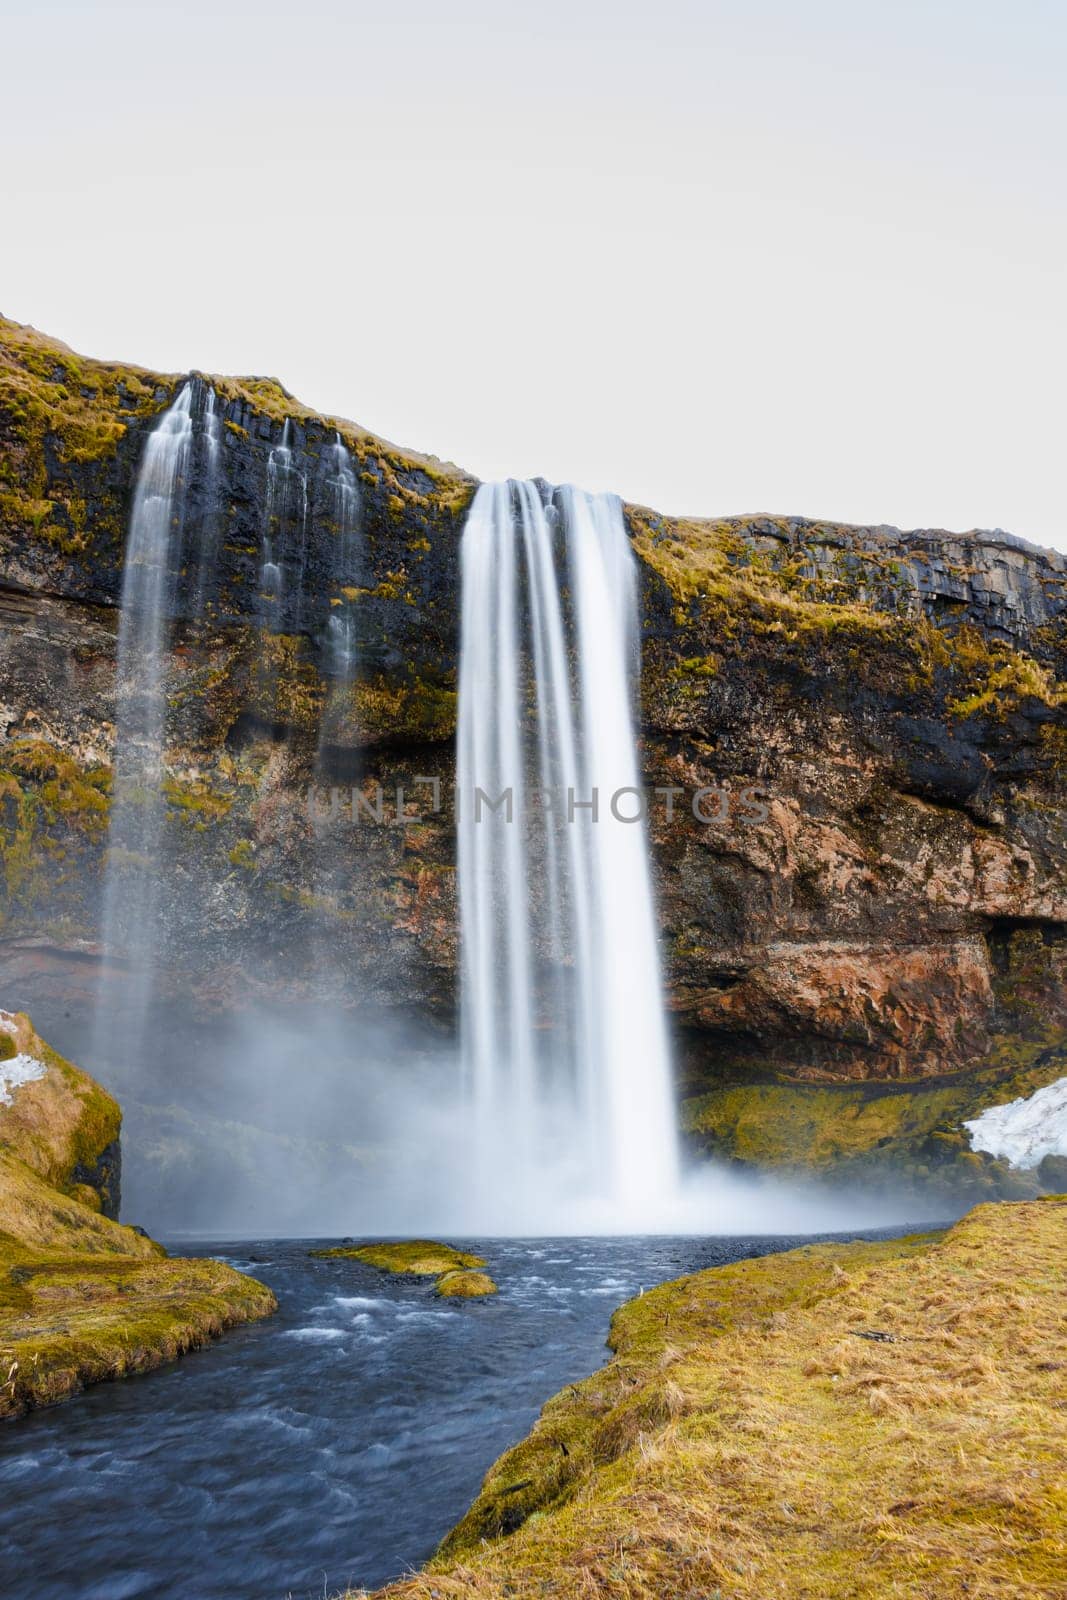 Picturesque icelandic cascade surrounded by high mountains and wonderful greenery. Seljalandsfoss waterfall rushes over an edge with freezing water and large stones, nordic destination.